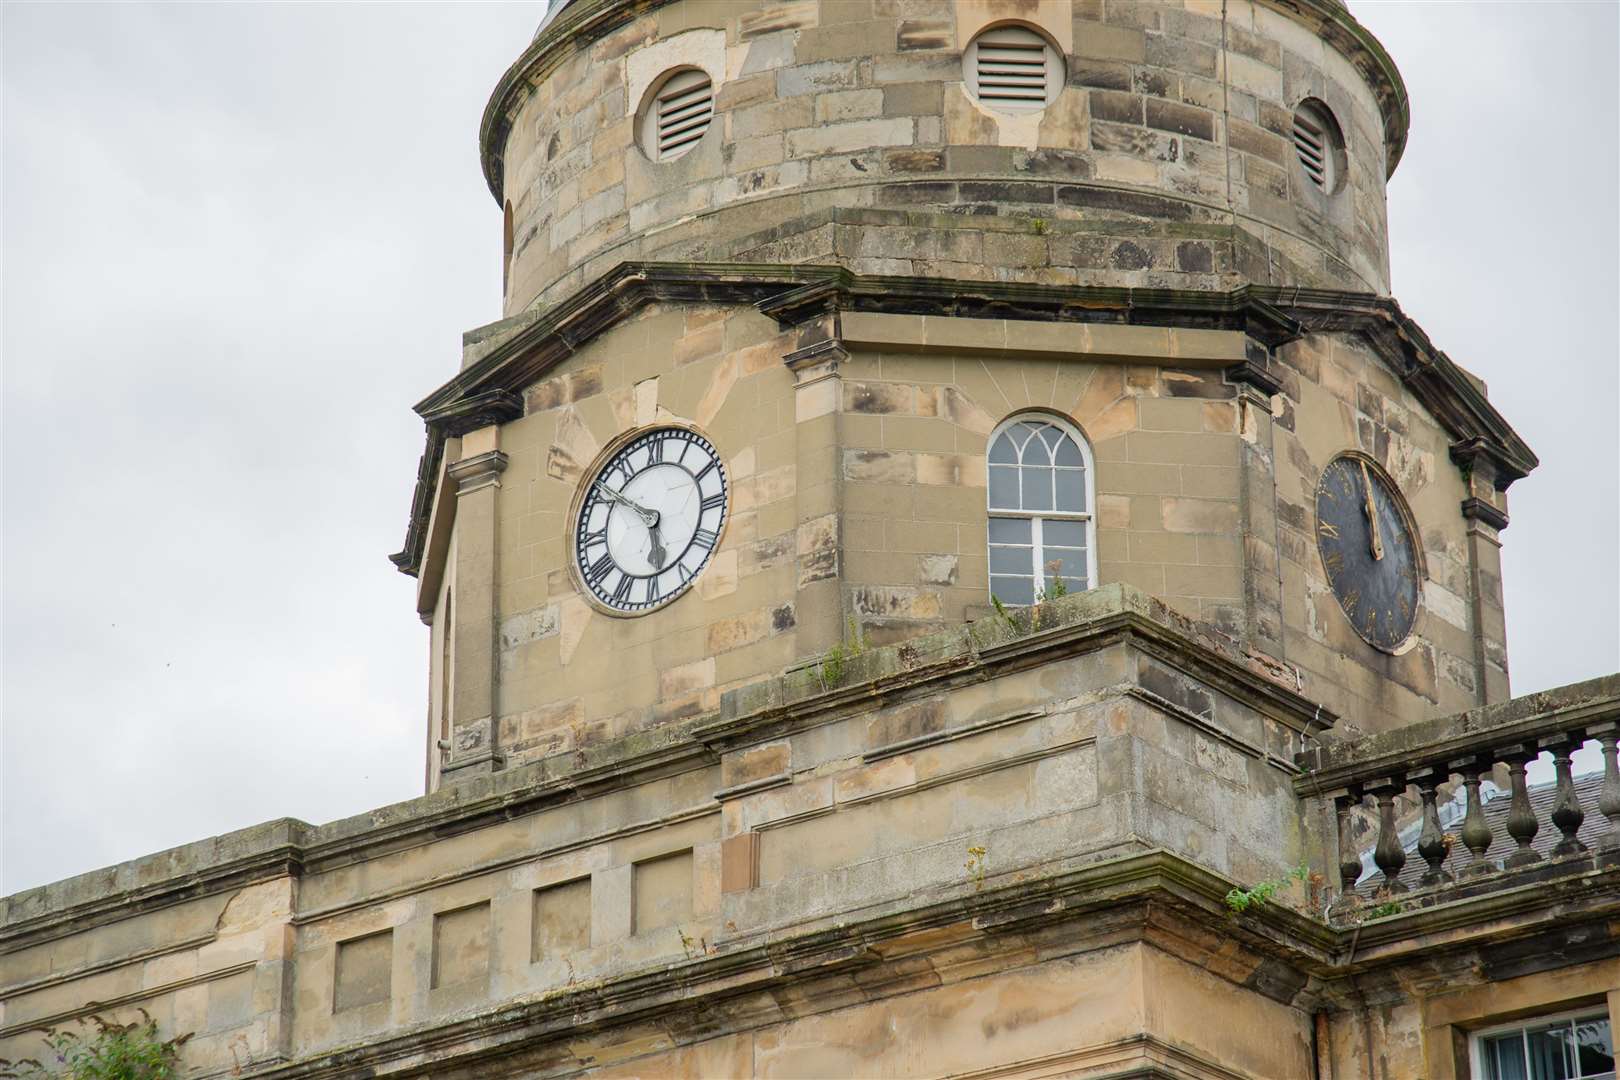 Scaffolding is to go up this week at the front of Dr Gray's Hospital, along with the clock tower, to allow work to begin on restoring the brickwork and clock faces. Picture: Daniel Forsyth.